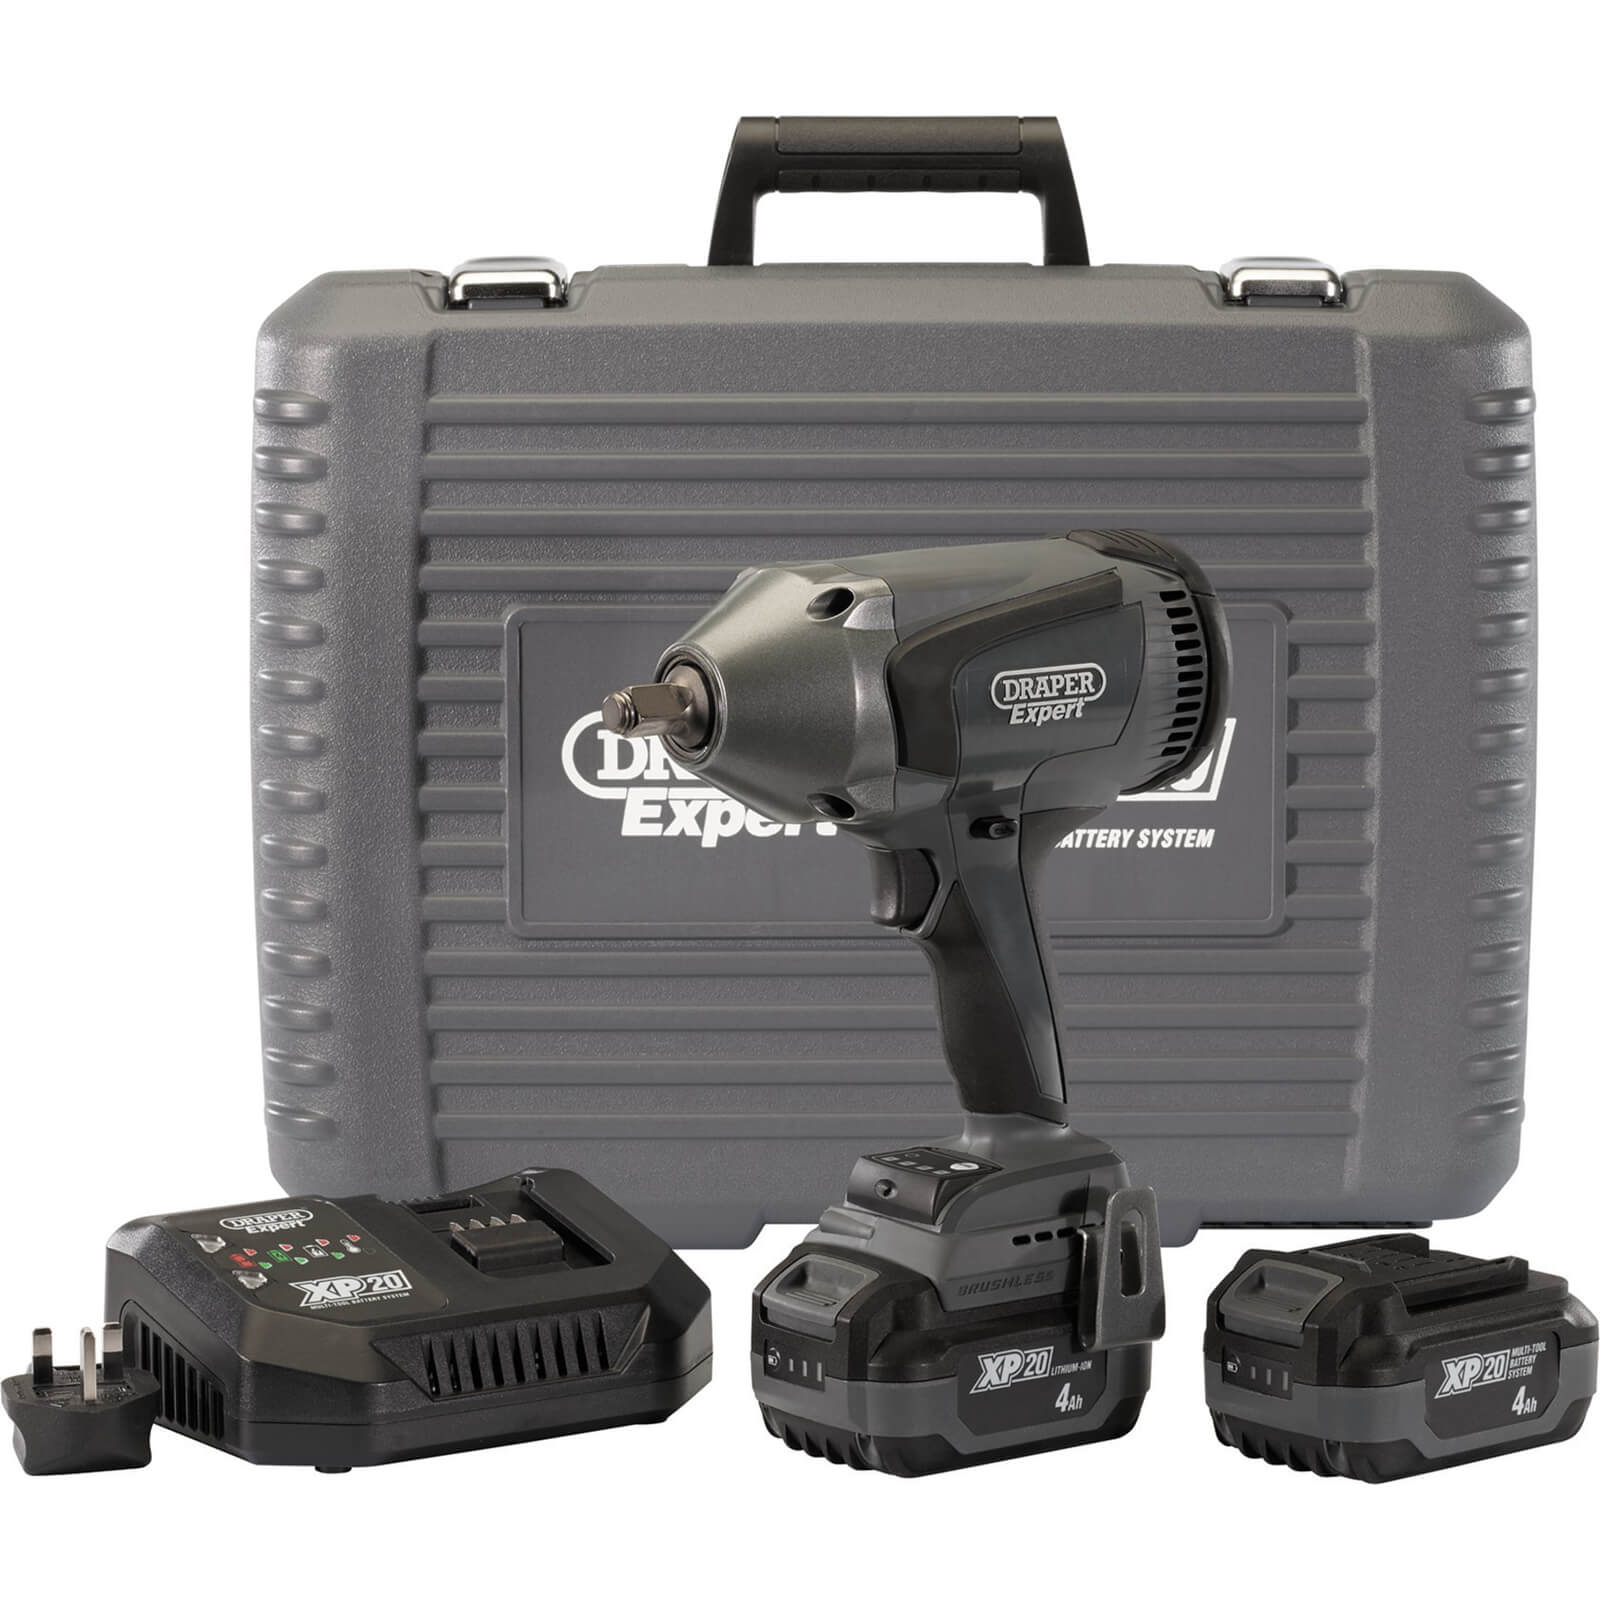 Image of Draper XP20 20V HD Cordless 1/2 Drive Brushless Impact Wrench 2 x 4ah Li-ion Charger Case